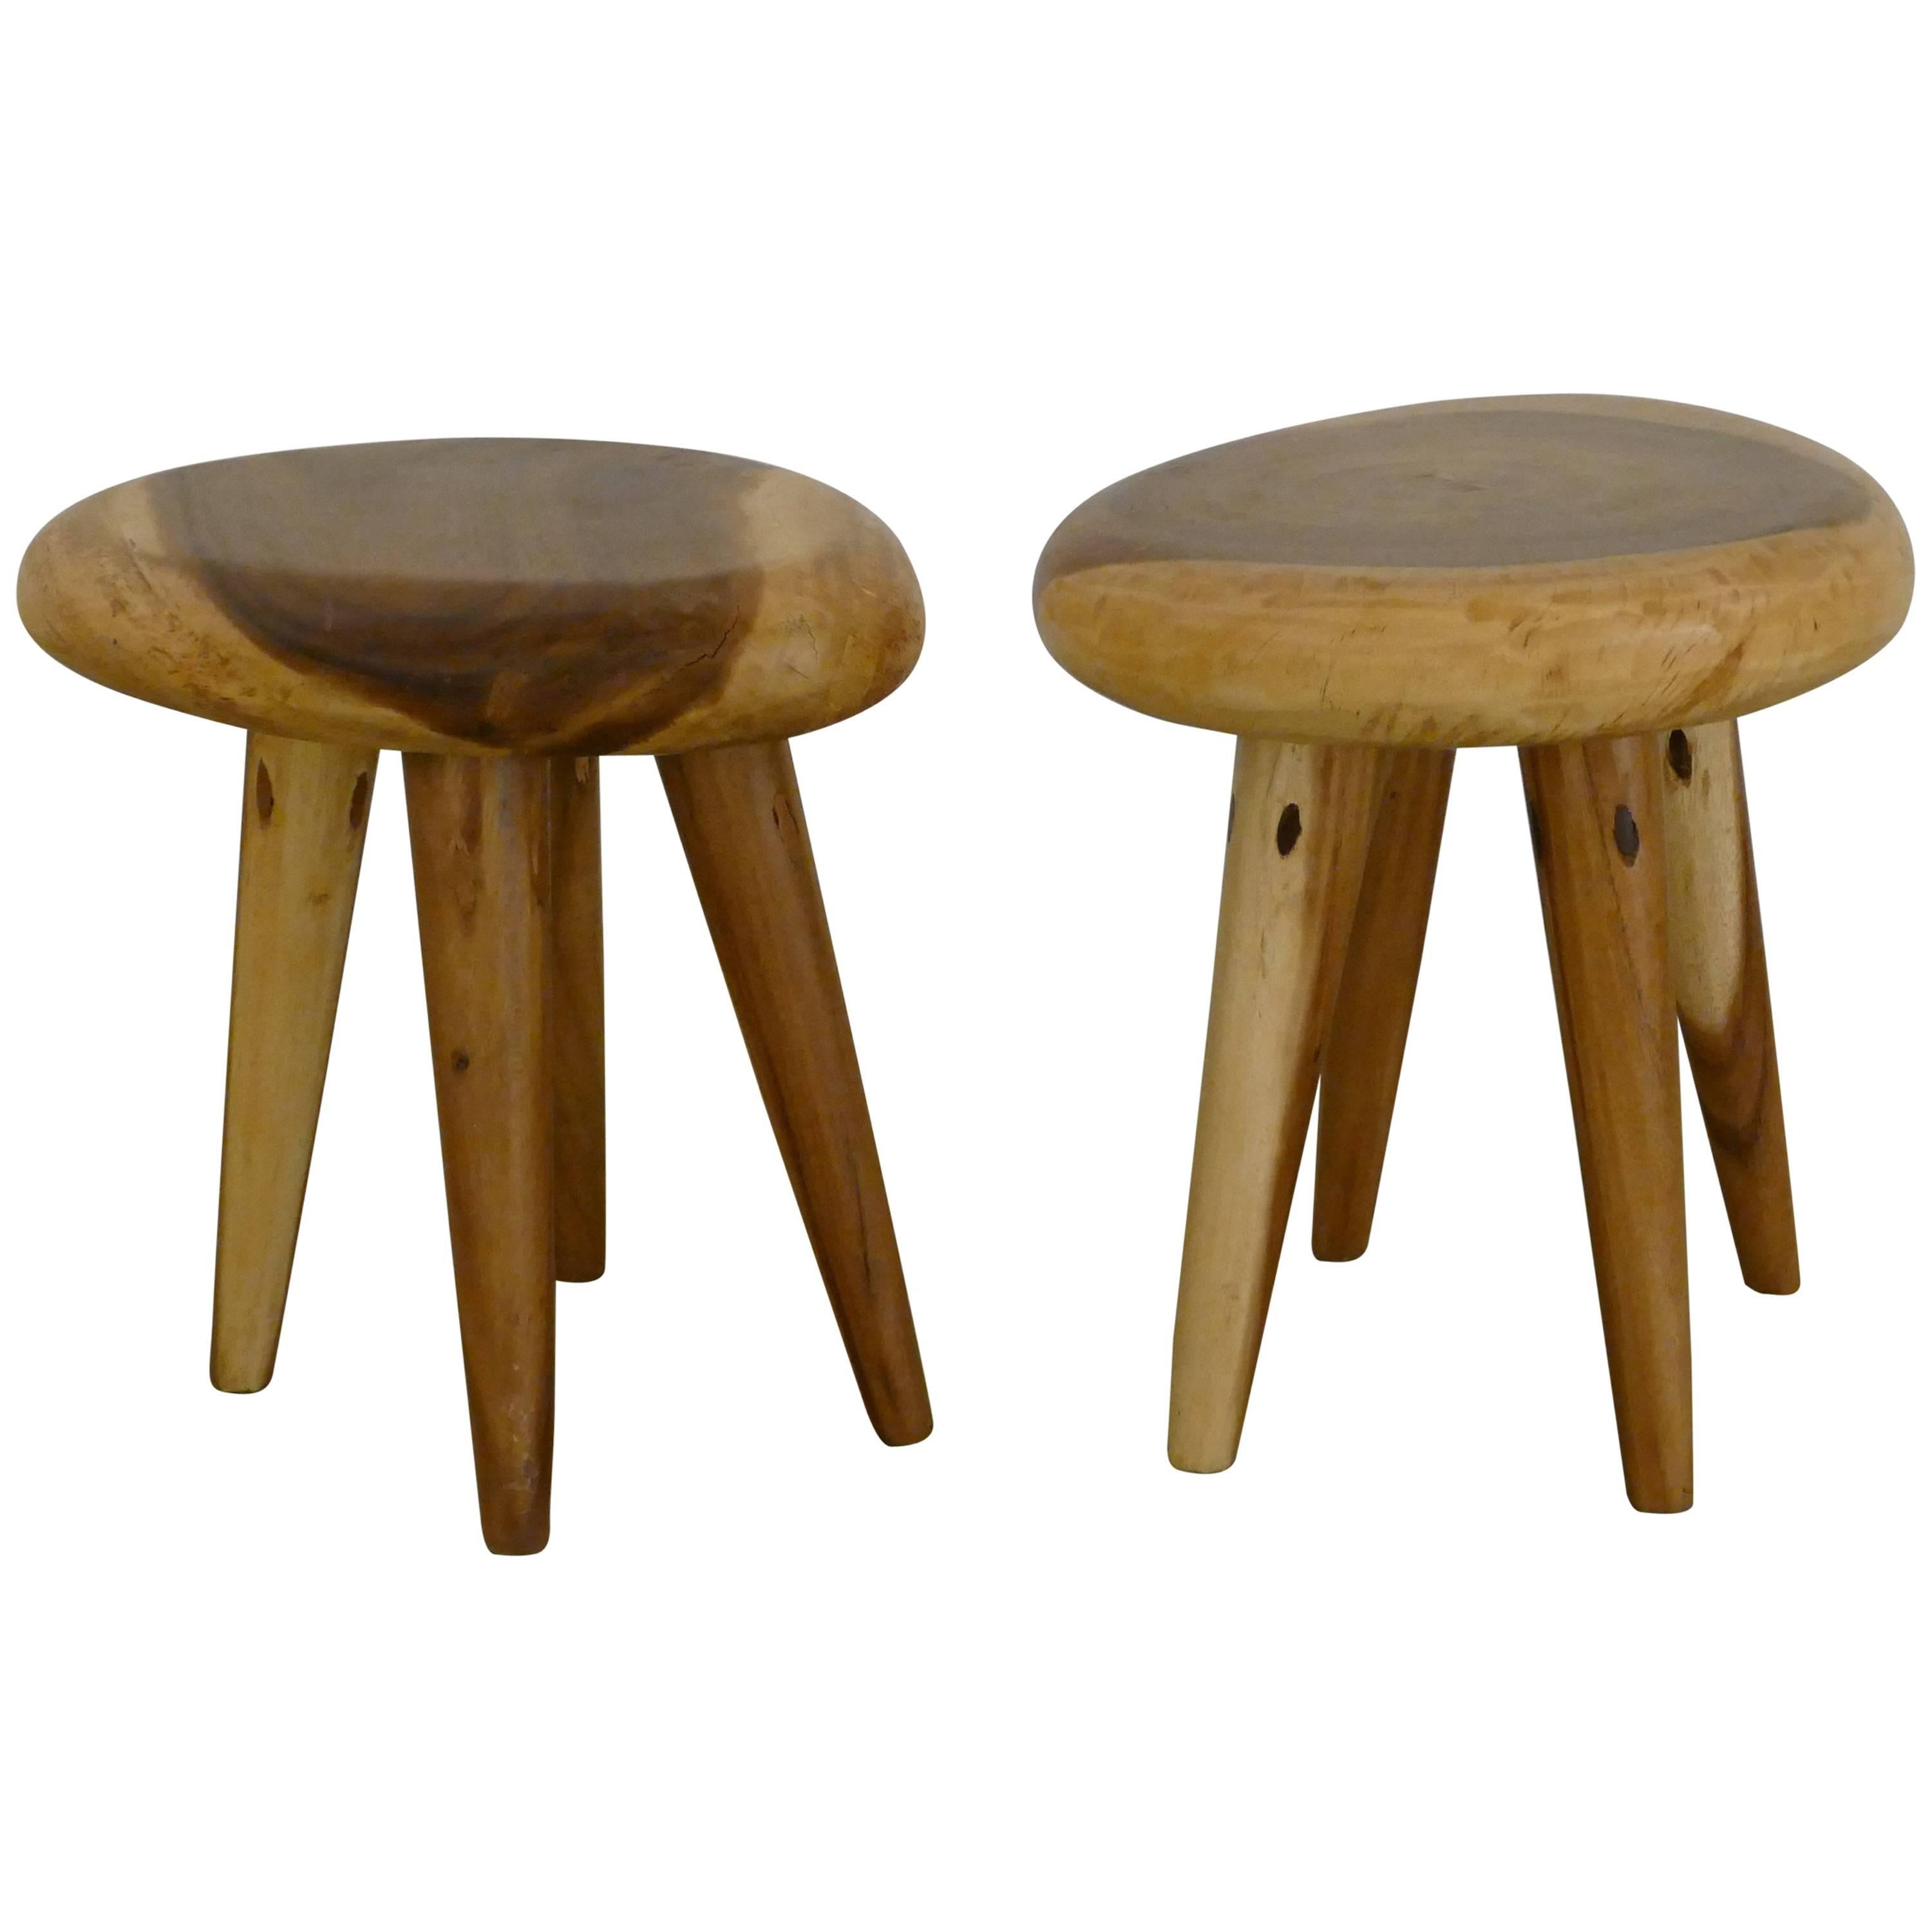 Pair of Side Tables in Acacia